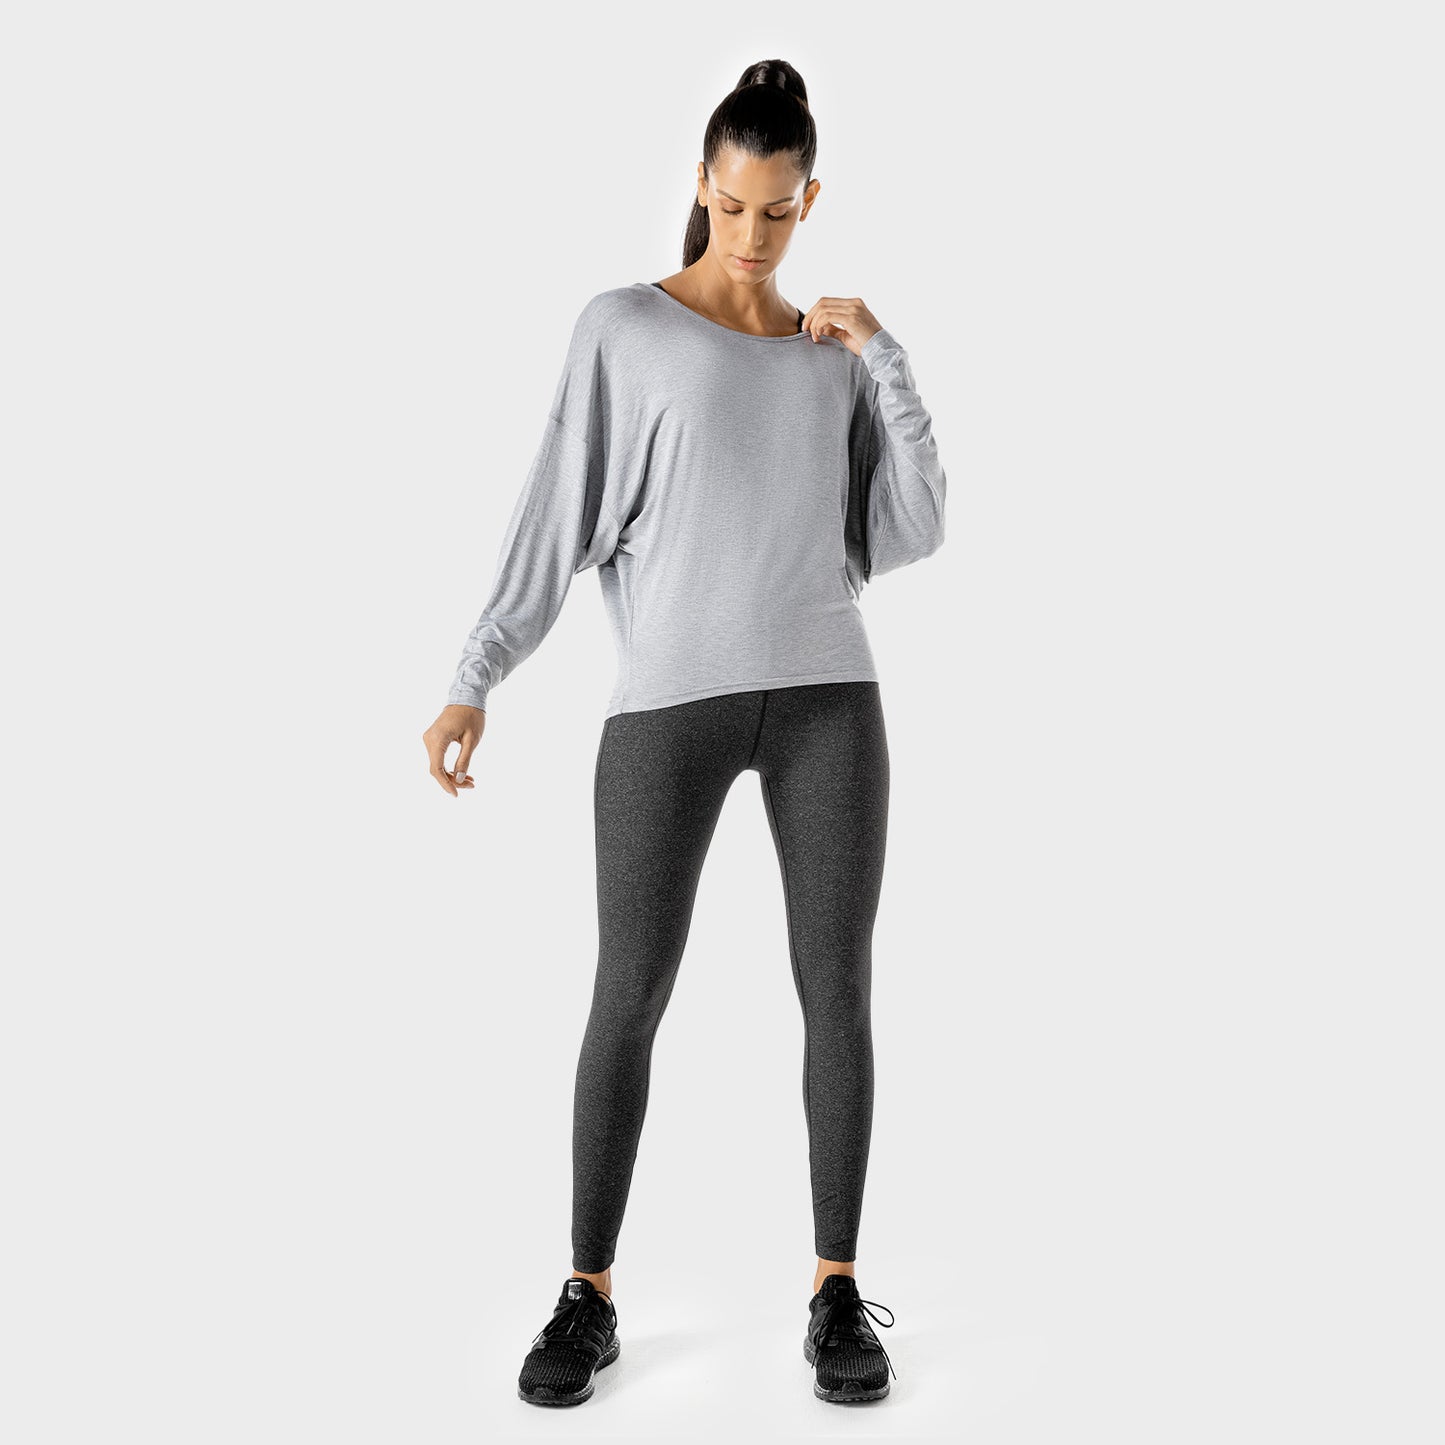 squatwolf-gym-wear-womens-fitness-batwing-top-grey-workout-shirts